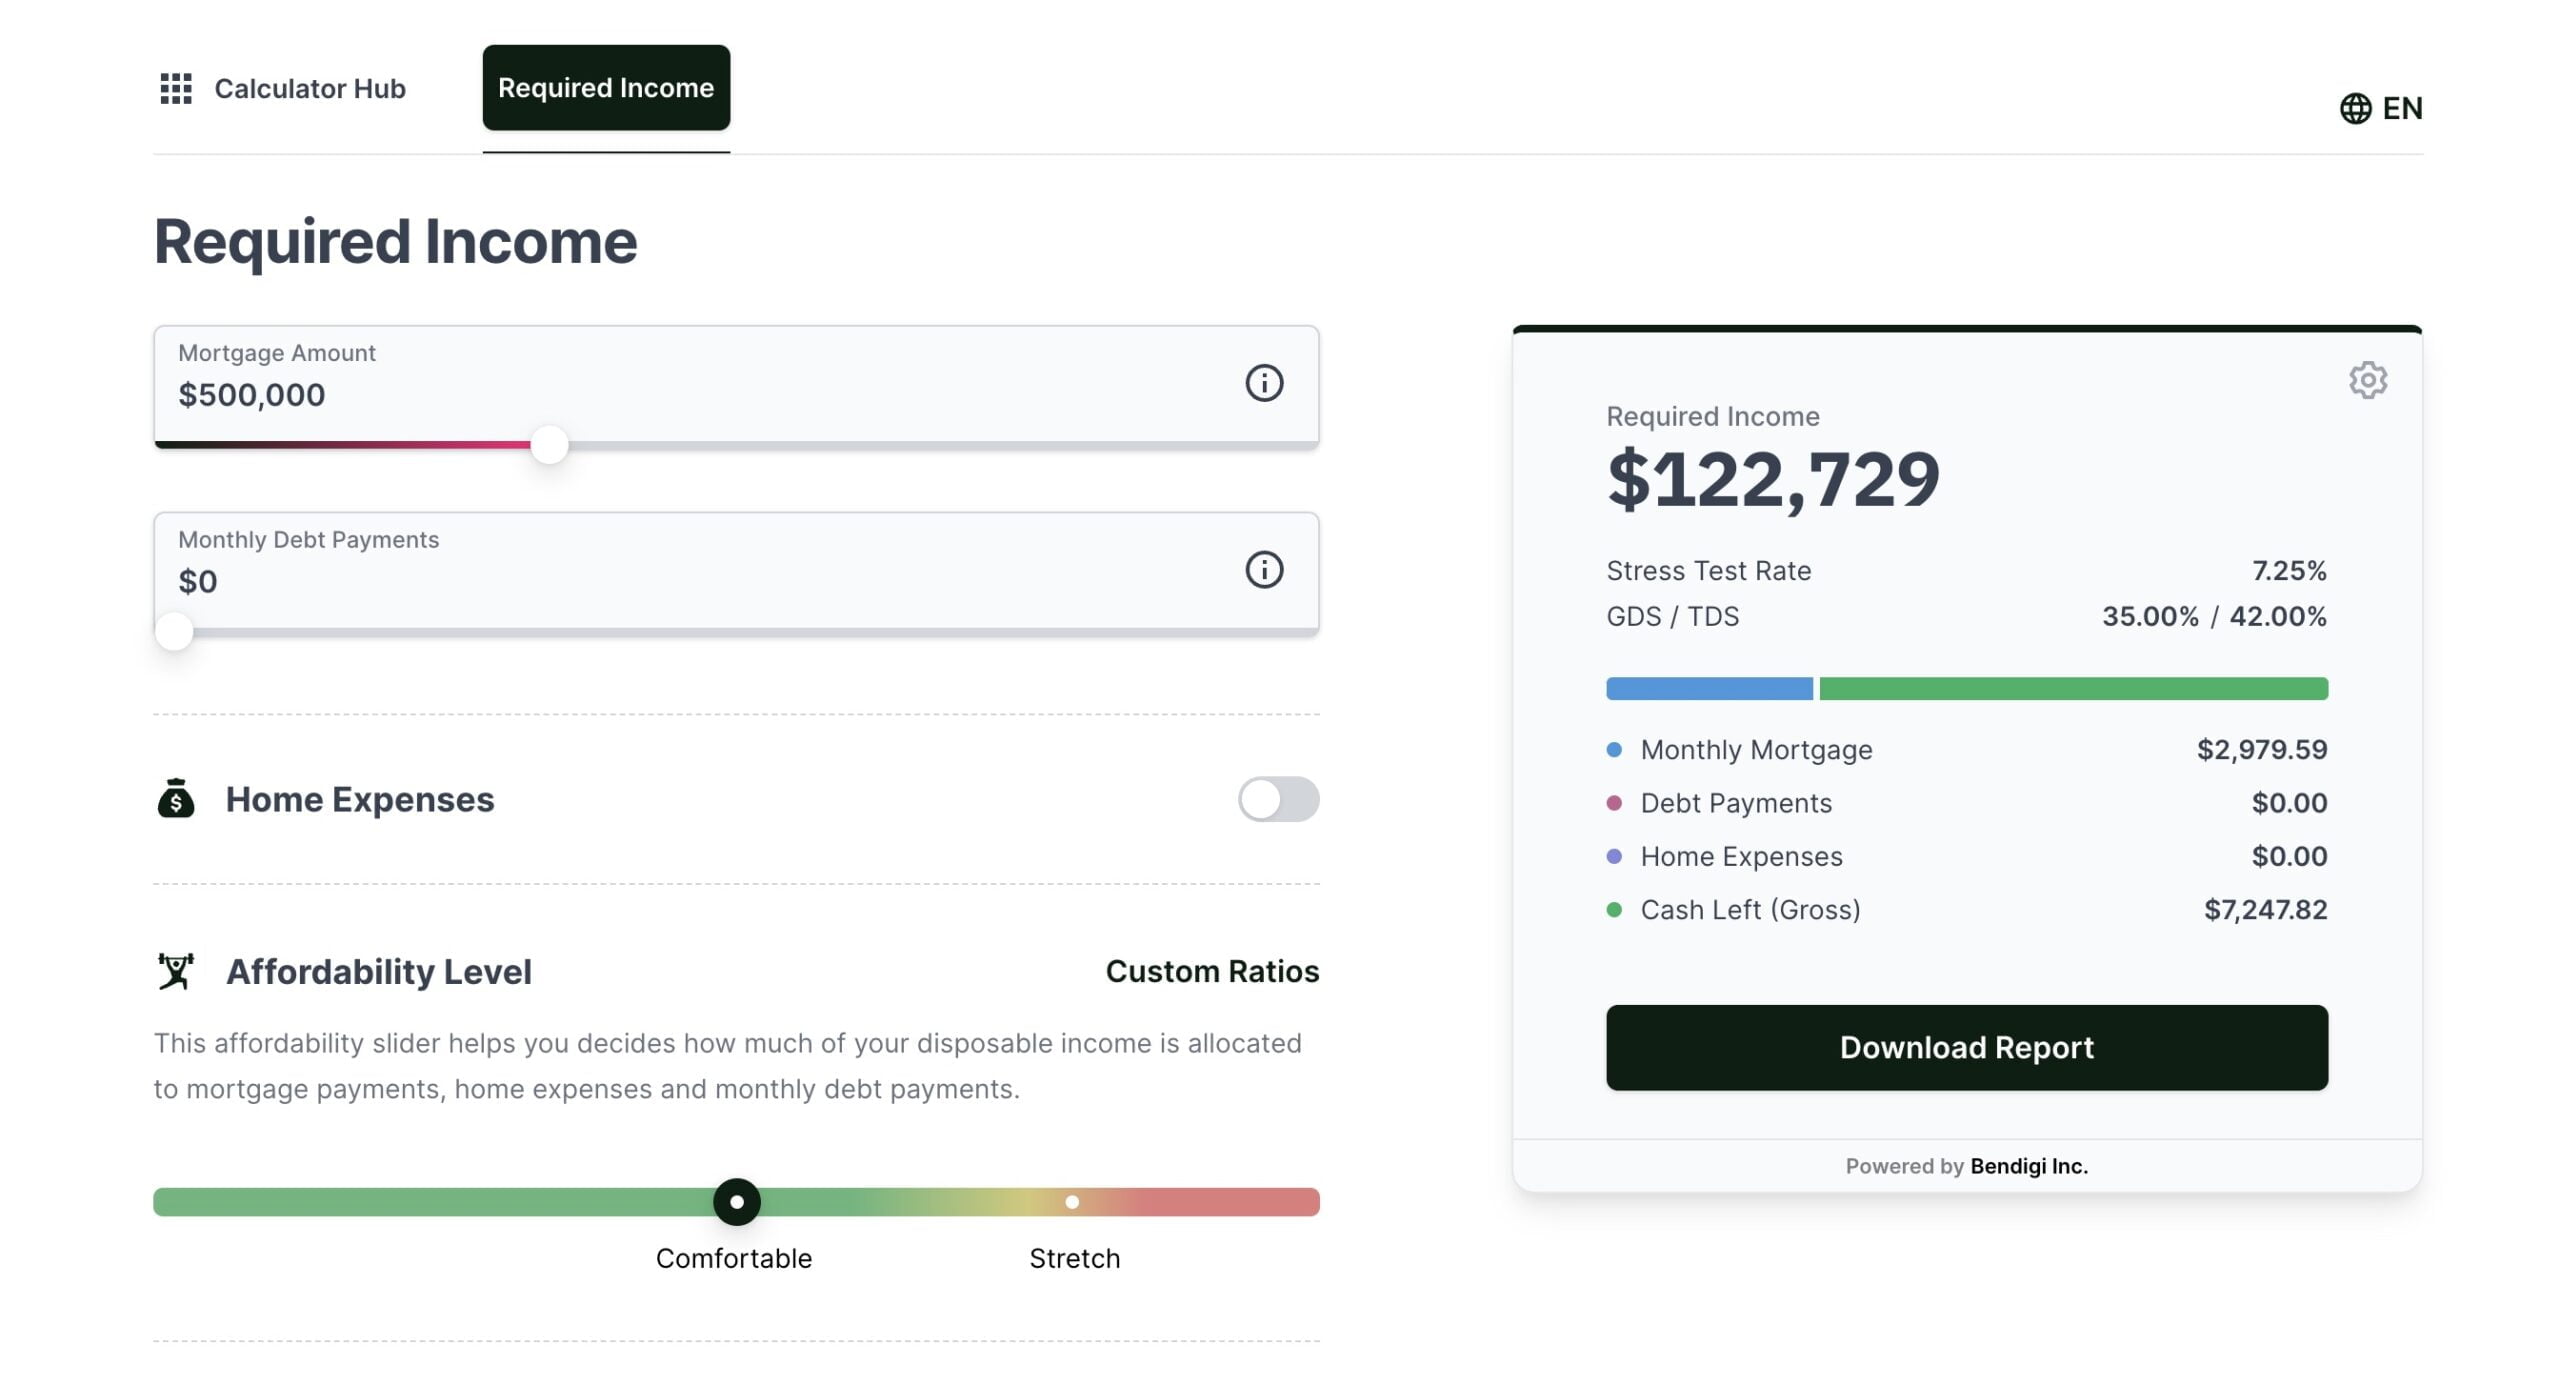 A mortgage calculator that helps the end user understand how much income they need to make in order to qualify for a mortgage.